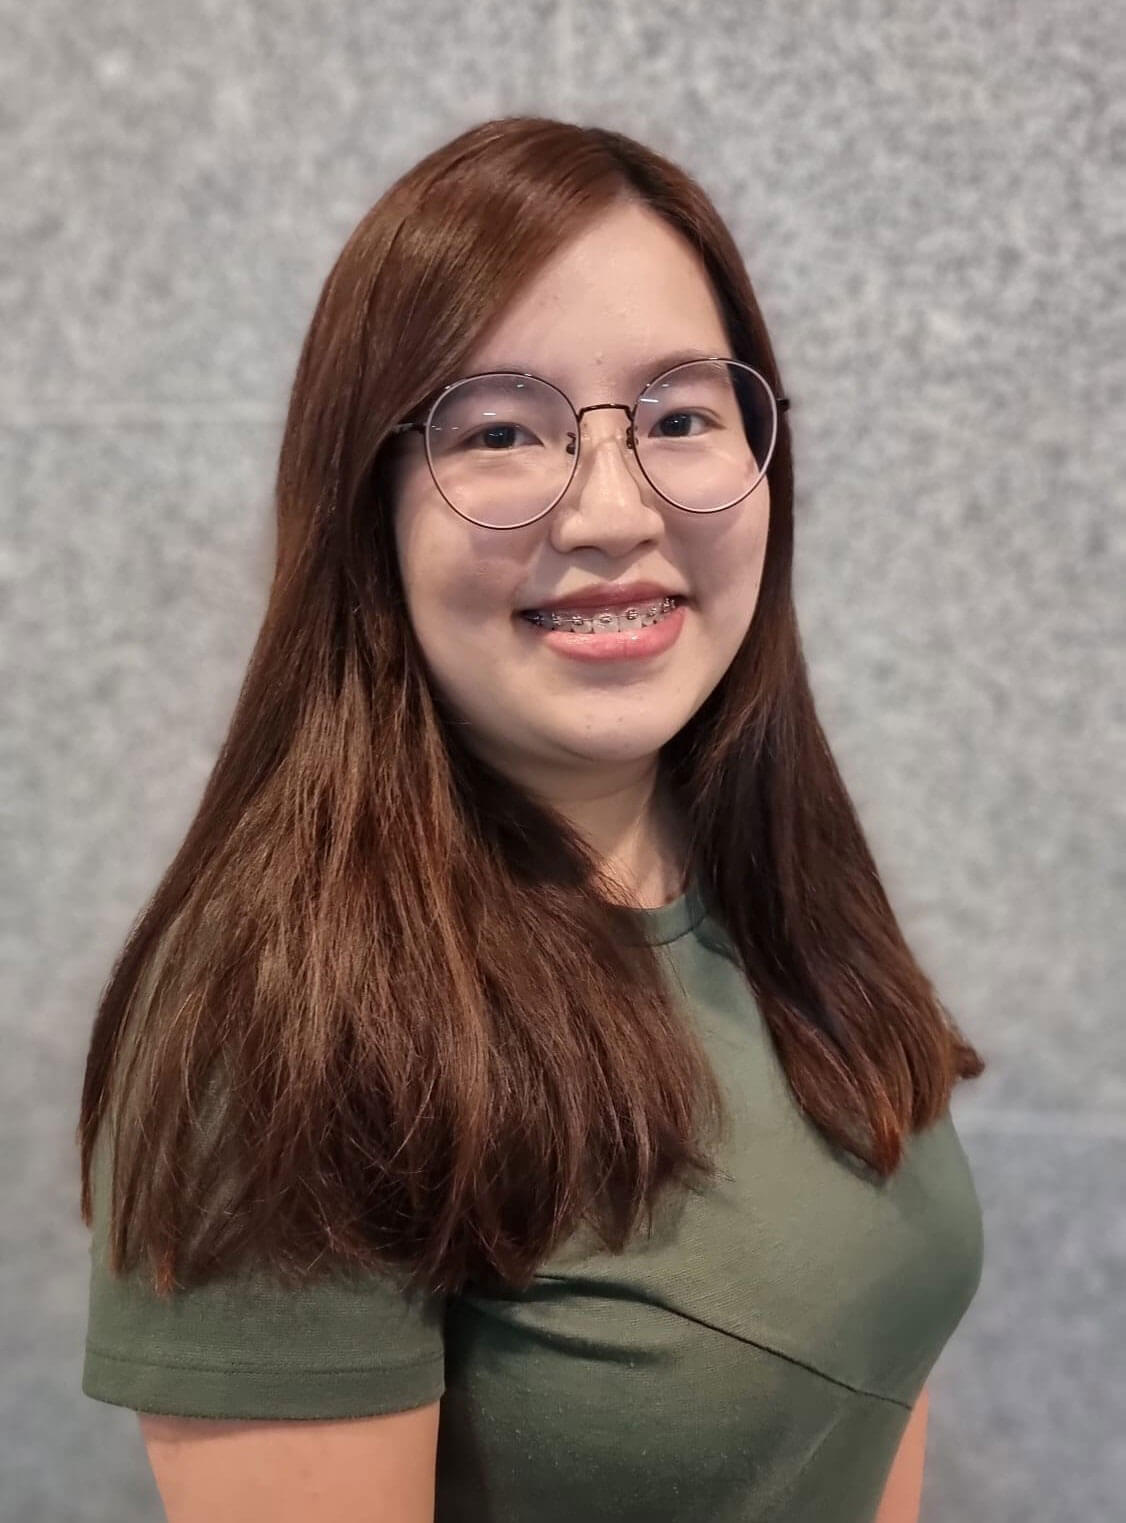 Carmen Chan wearing glasses and smiling at the camera